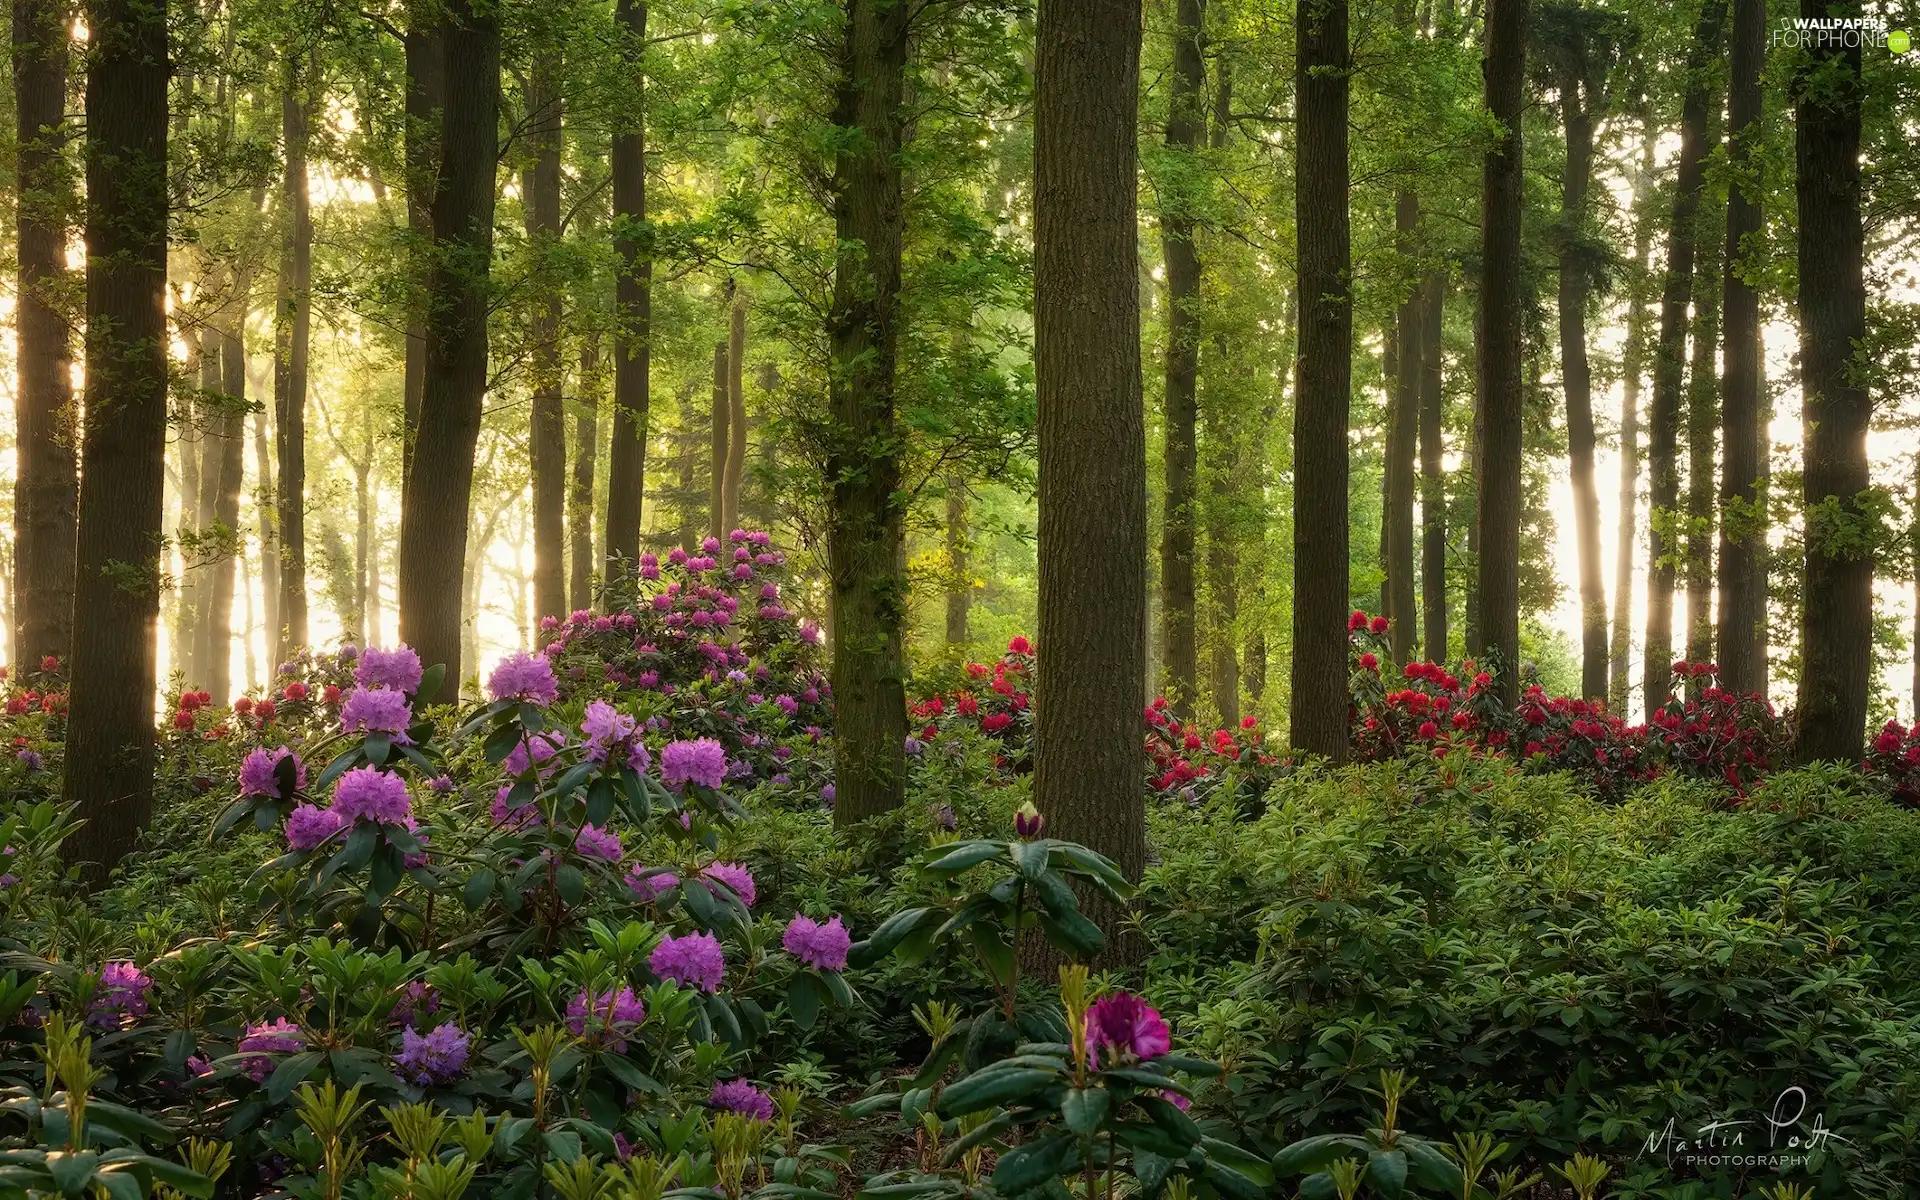 viewes, forest, Rhododendron, Rhododendrons, Bush, trees